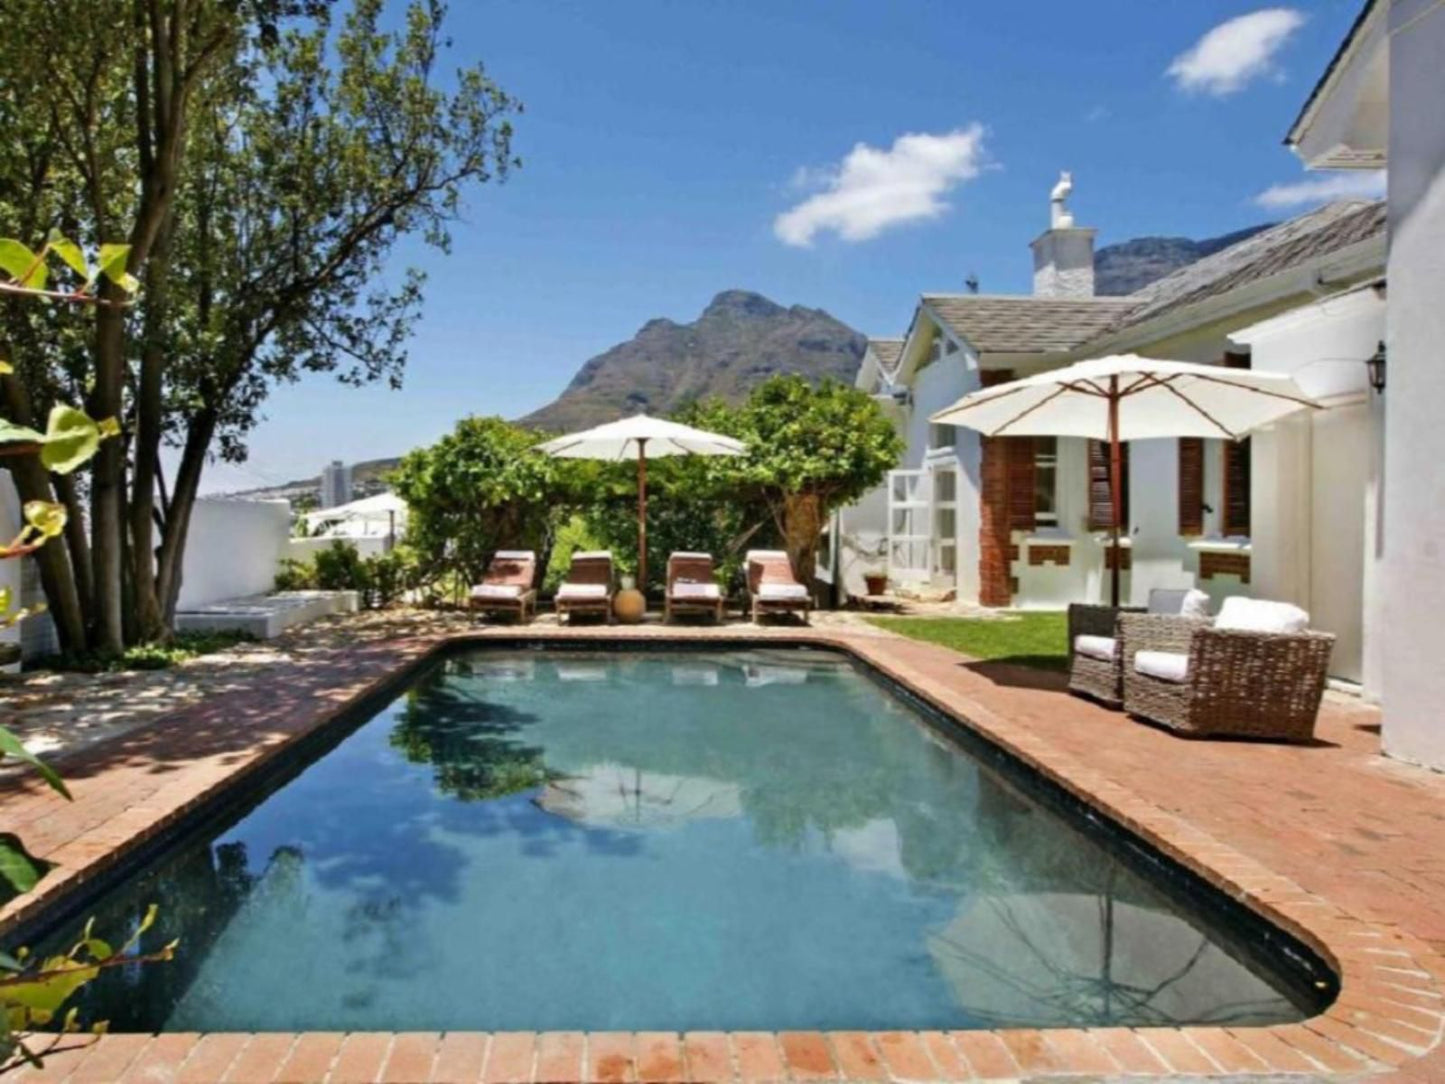 Inawestays Cottages Gardens Cape Town Western Cape South Africa Complementary Colors, House, Building, Architecture, Swimming Pool